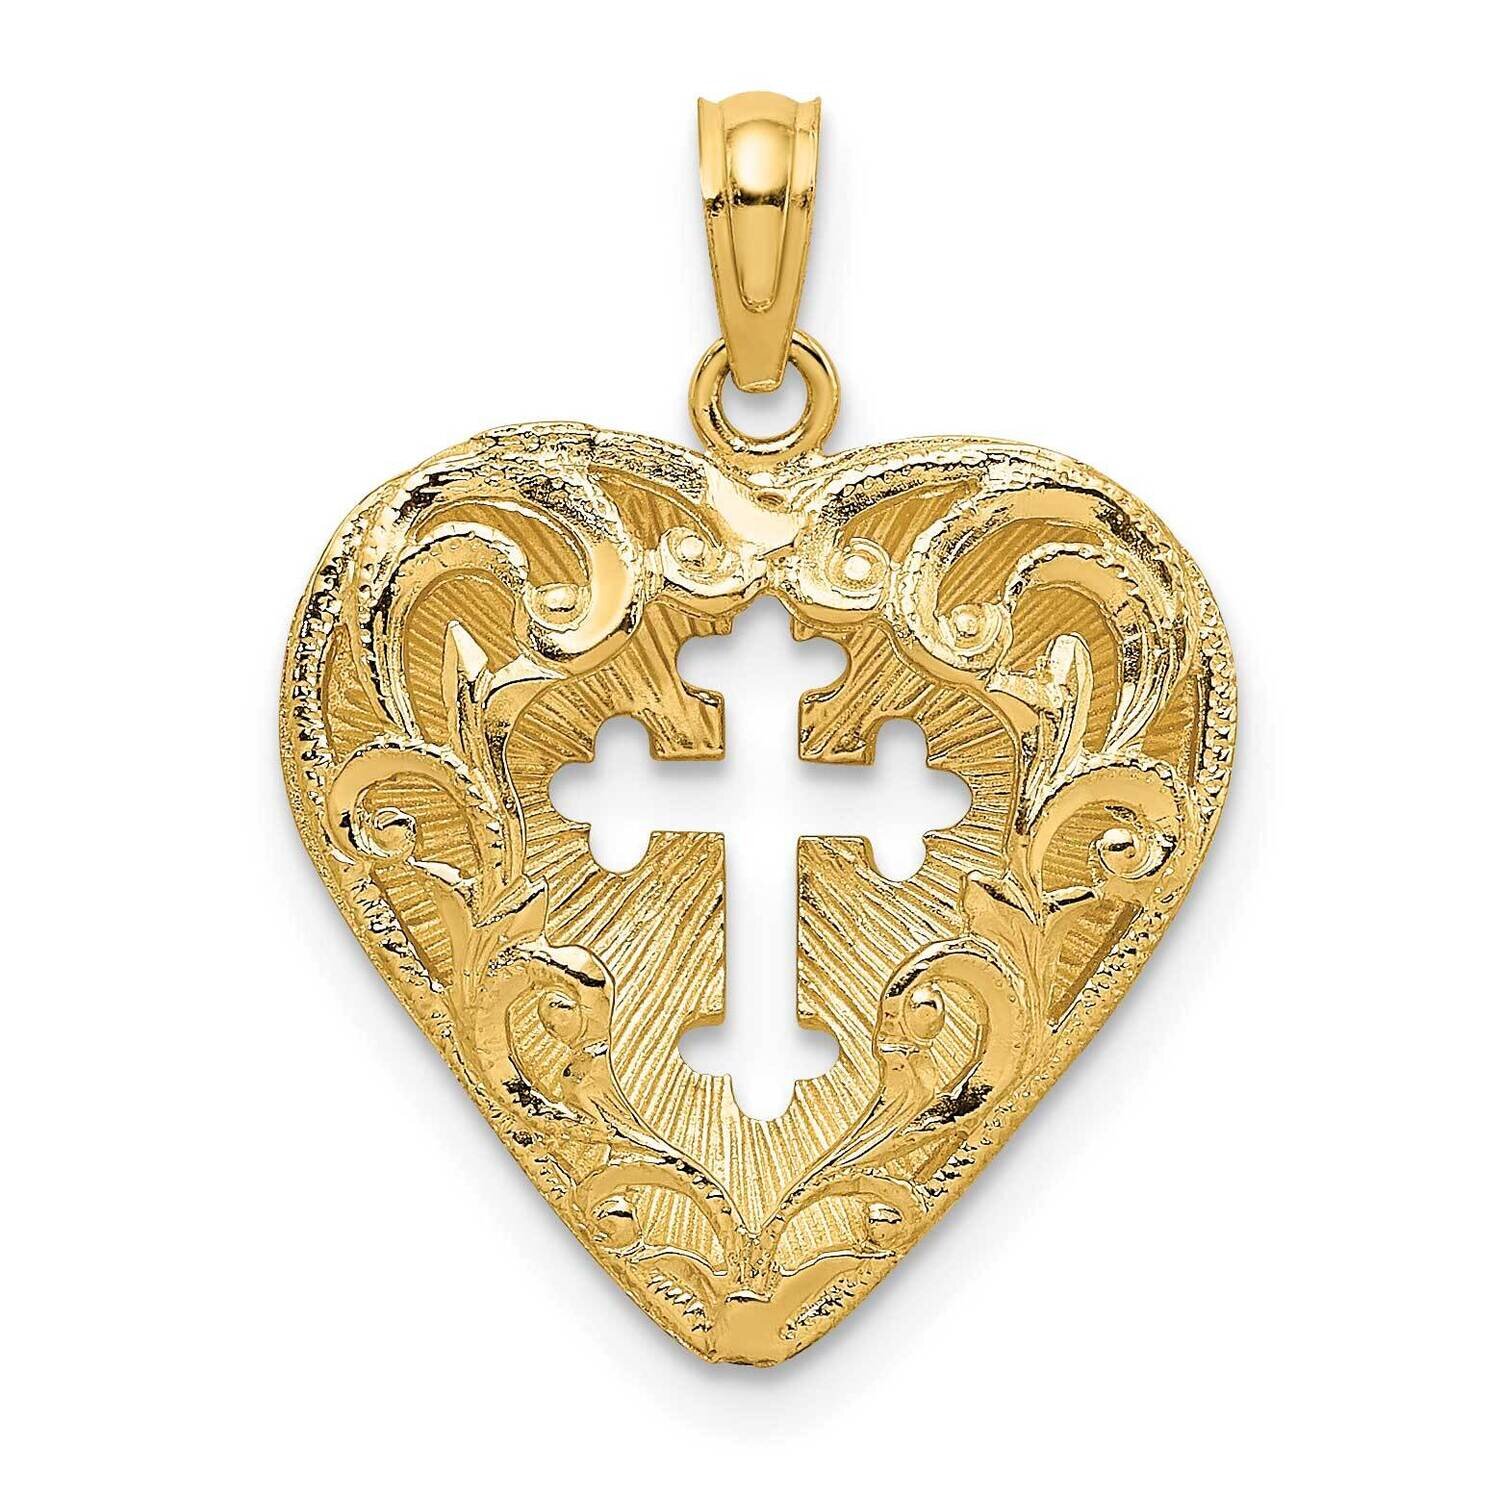 Cut-Out with Lace Cross In Heart (Reversible) Charm 14k Gold 3-D K8592